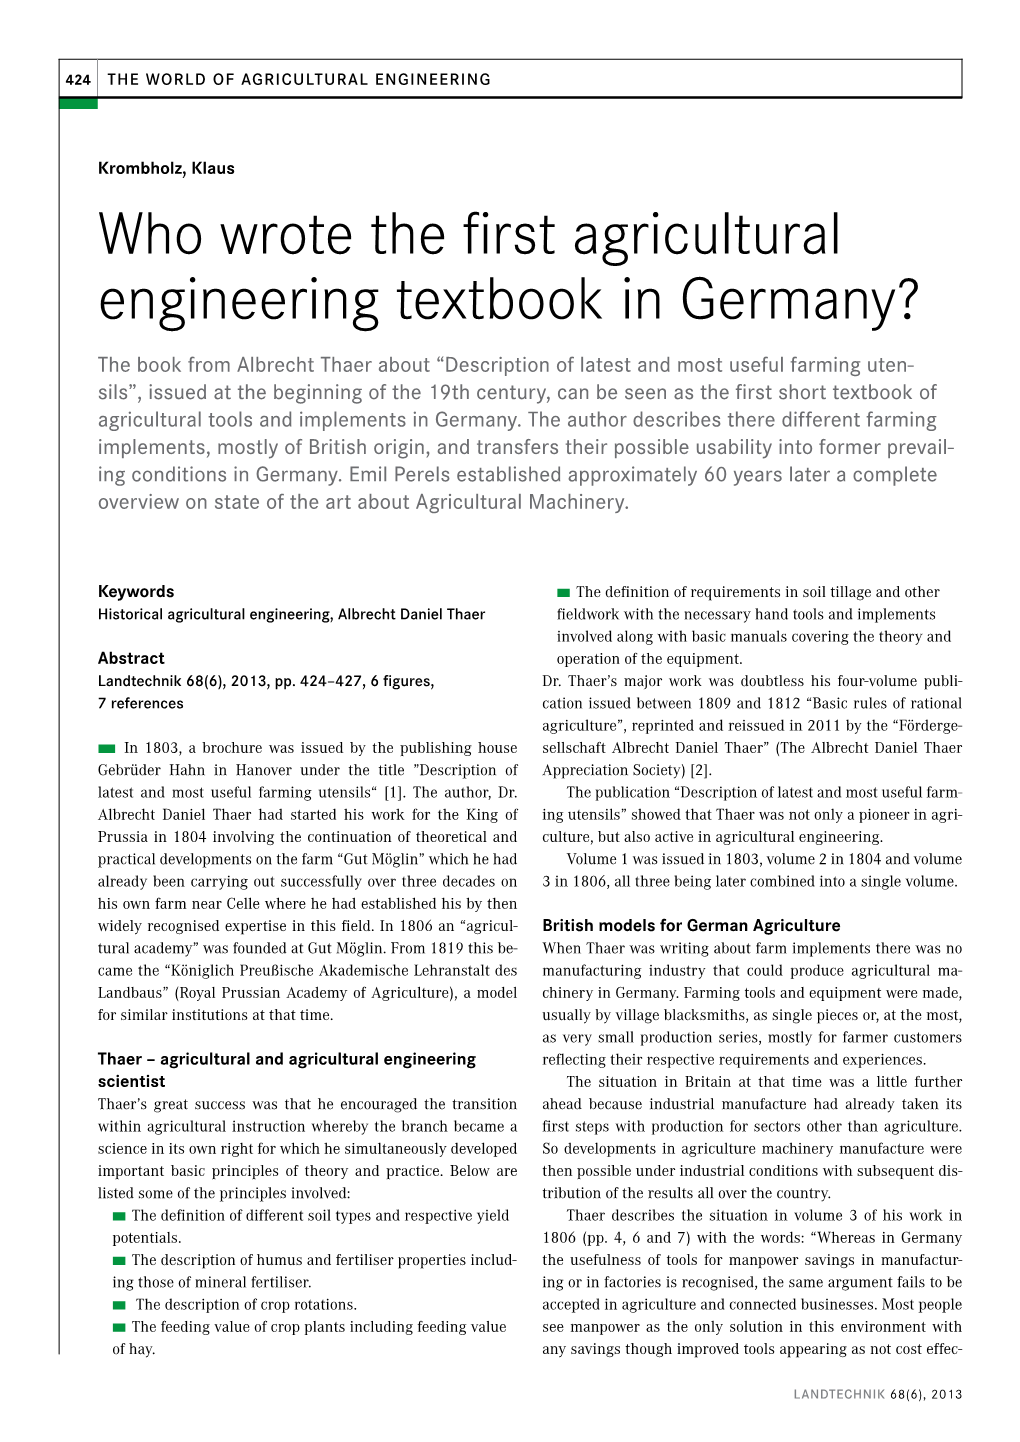 Who Wrote the First Agricultural Engineering Textbook in Germany?